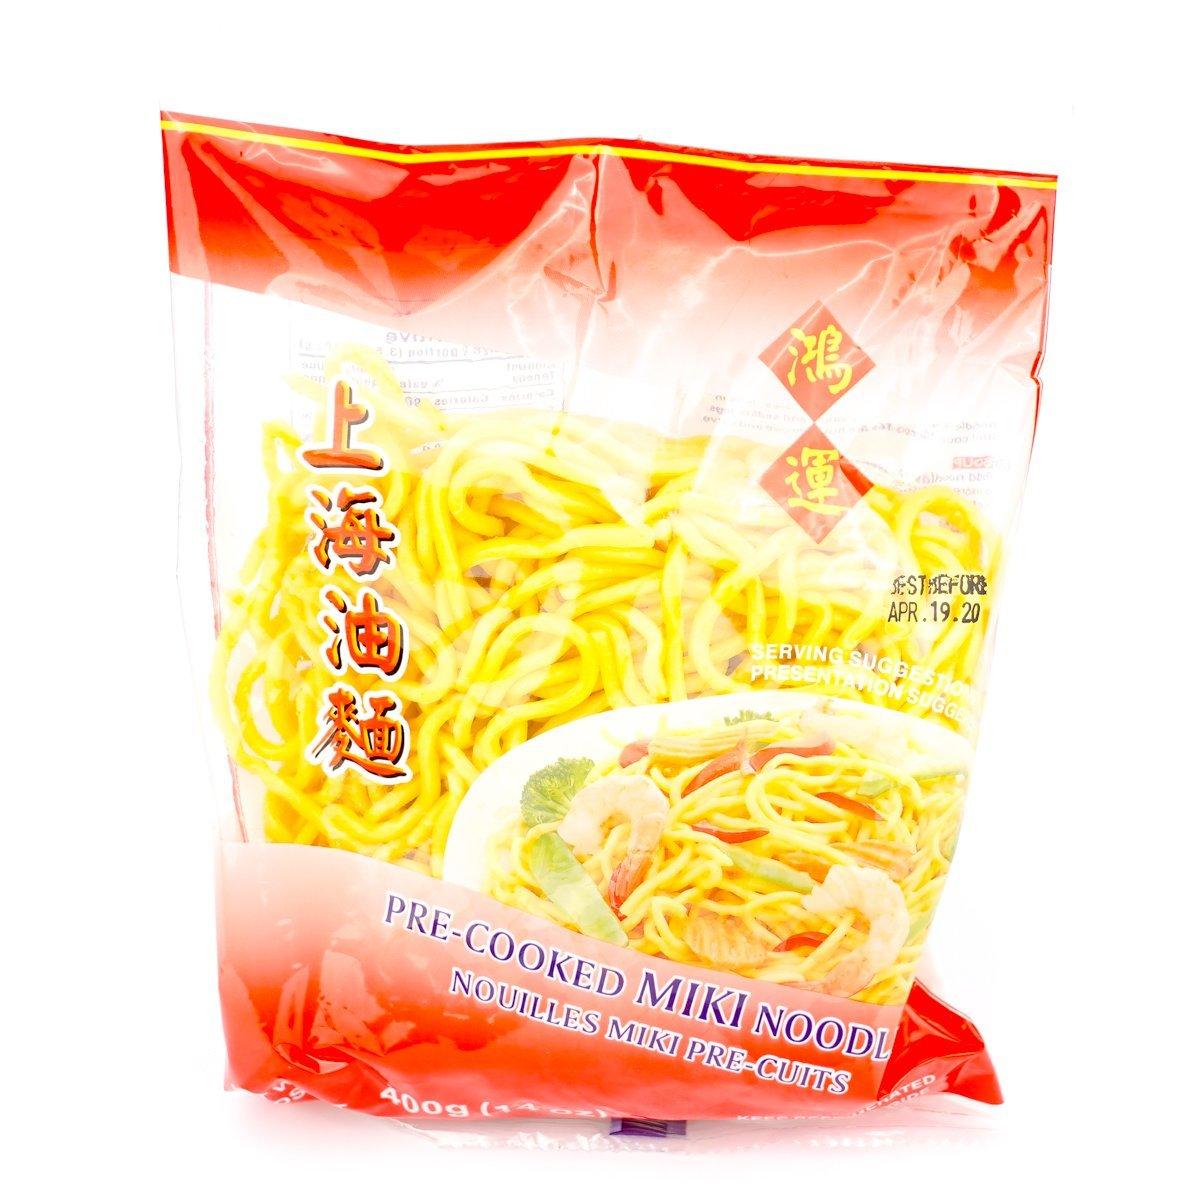 hung-wang-pre-cooked-miki-noodles-refrigerated